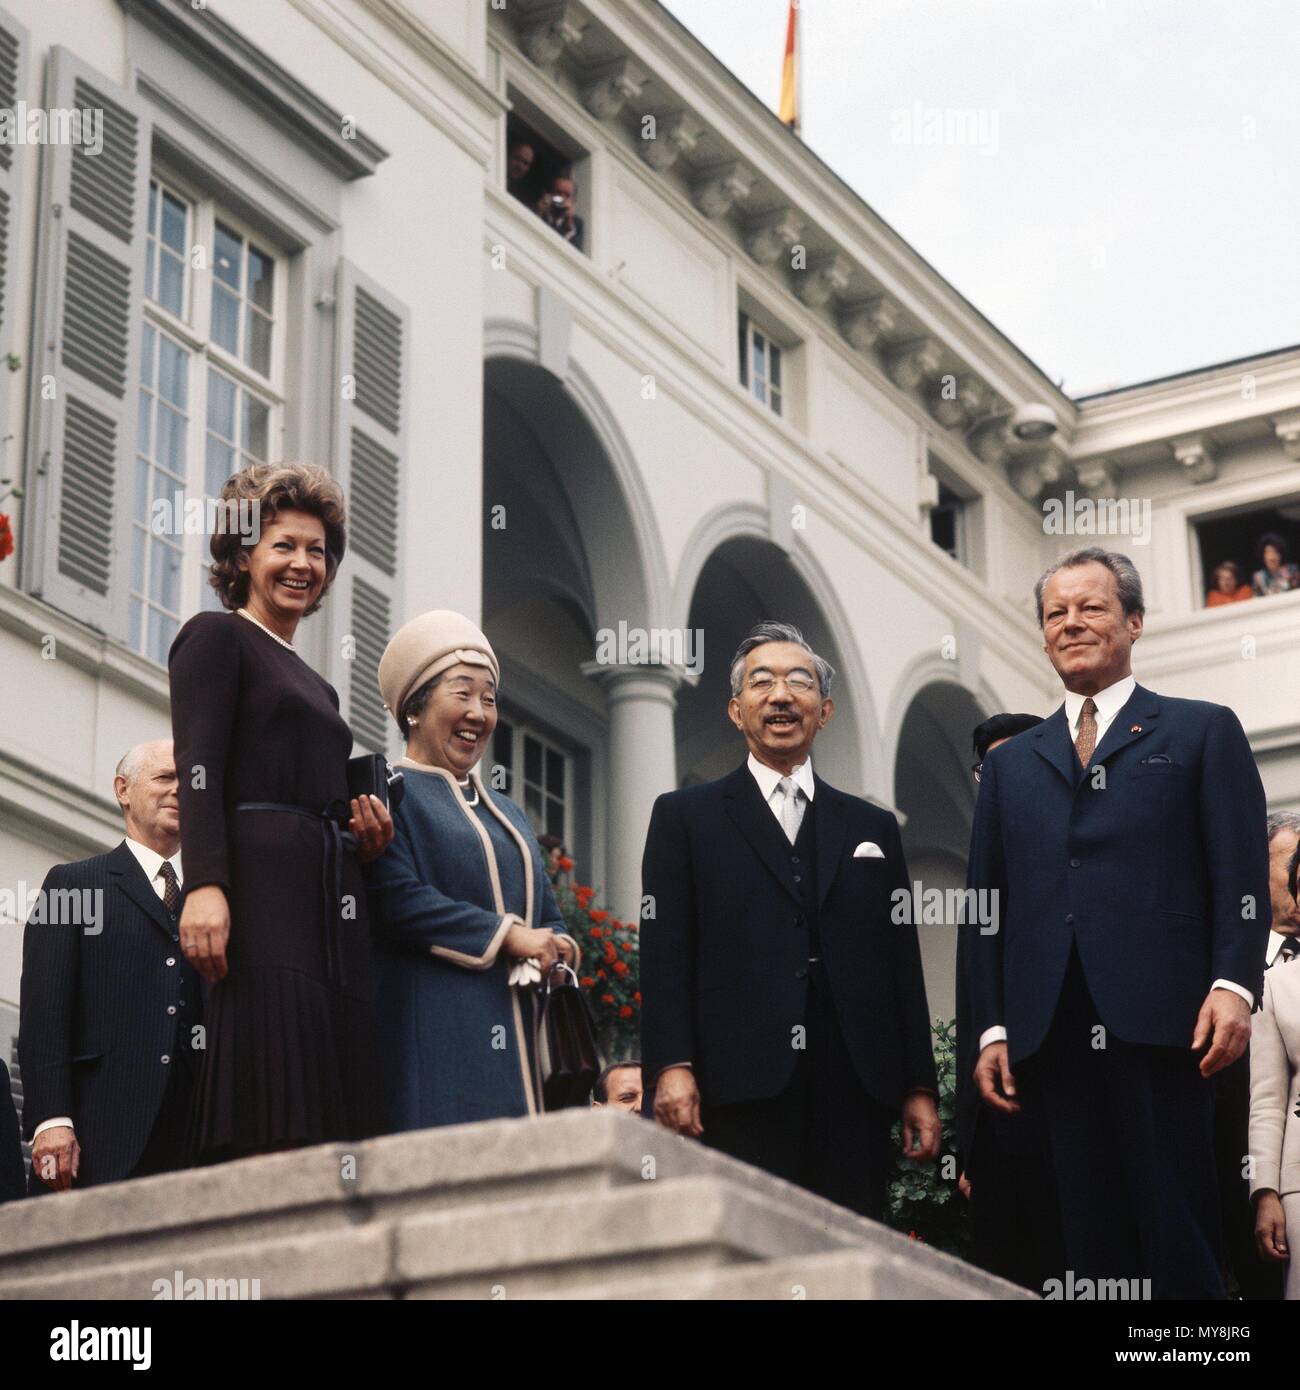 (L-R) Rut Brandt, Empress Nagako, Emperor Hirohito and Chancellor Willy Brandt in front of the German chancellery on 13 October 1971, the last day of the 3-day state visit of the Japanese emperor and empress. | usage worldwide Stock Photo